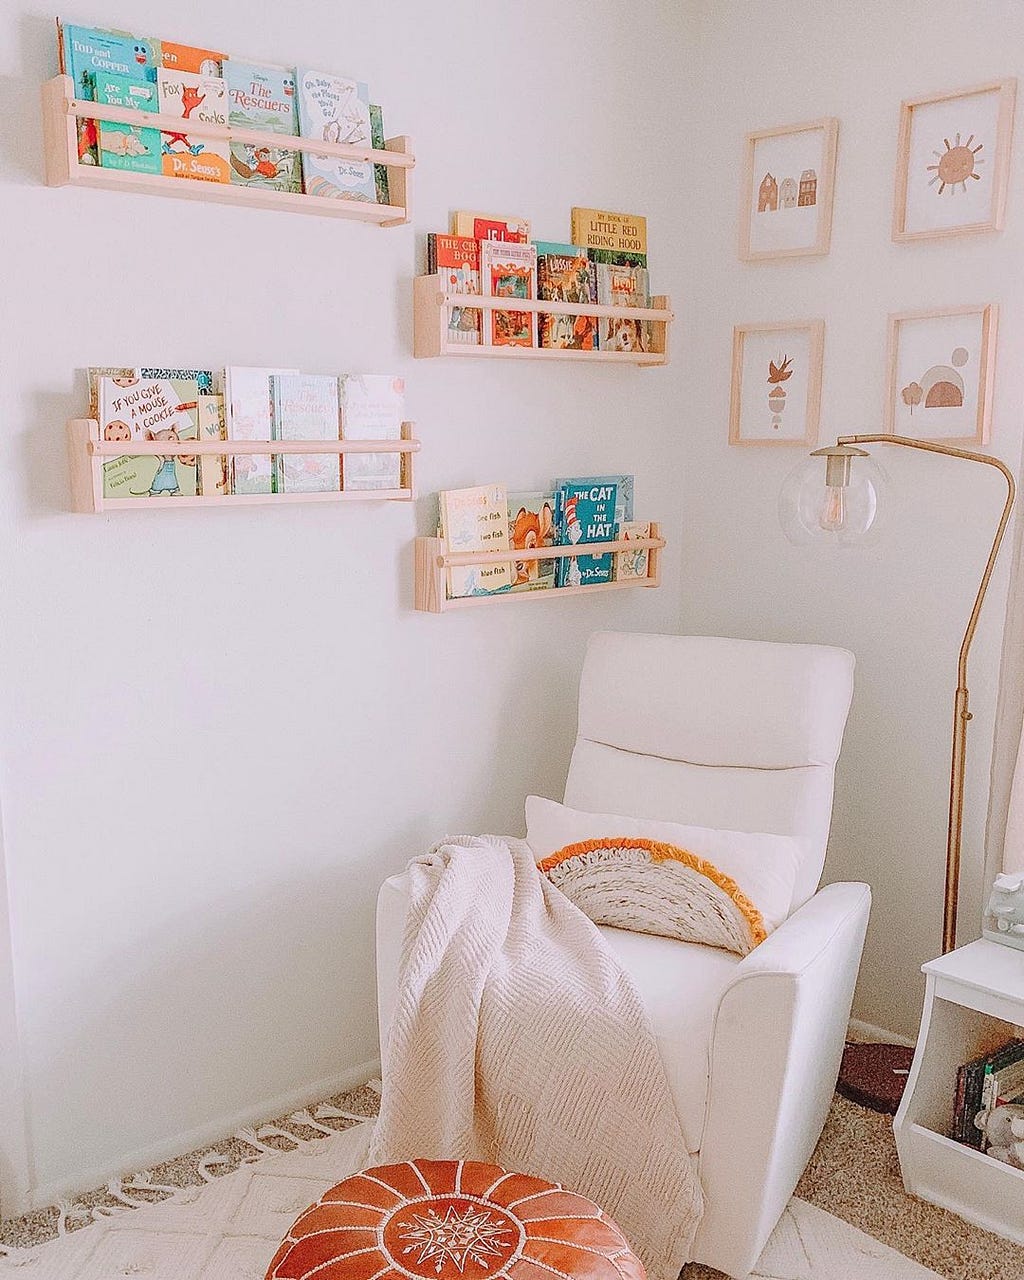 A kids room reading corner with a white reclining seat and wood framed wall art with wood shelves with books on the wall.